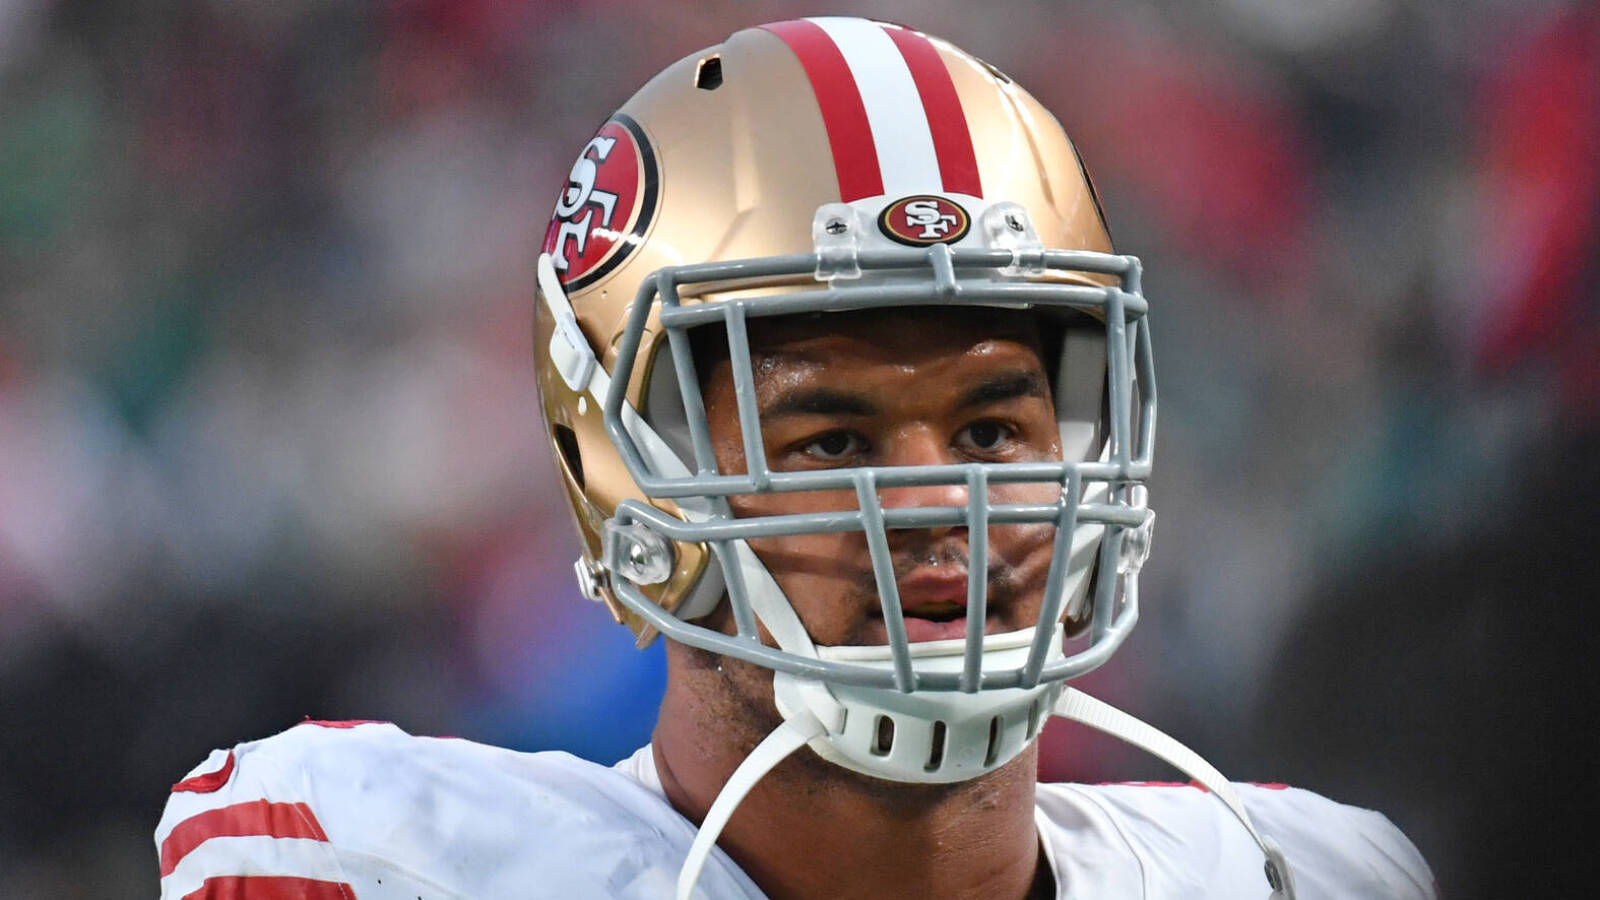 Ex-49er felt ‘extremely disrespected’ by team’s contract offer